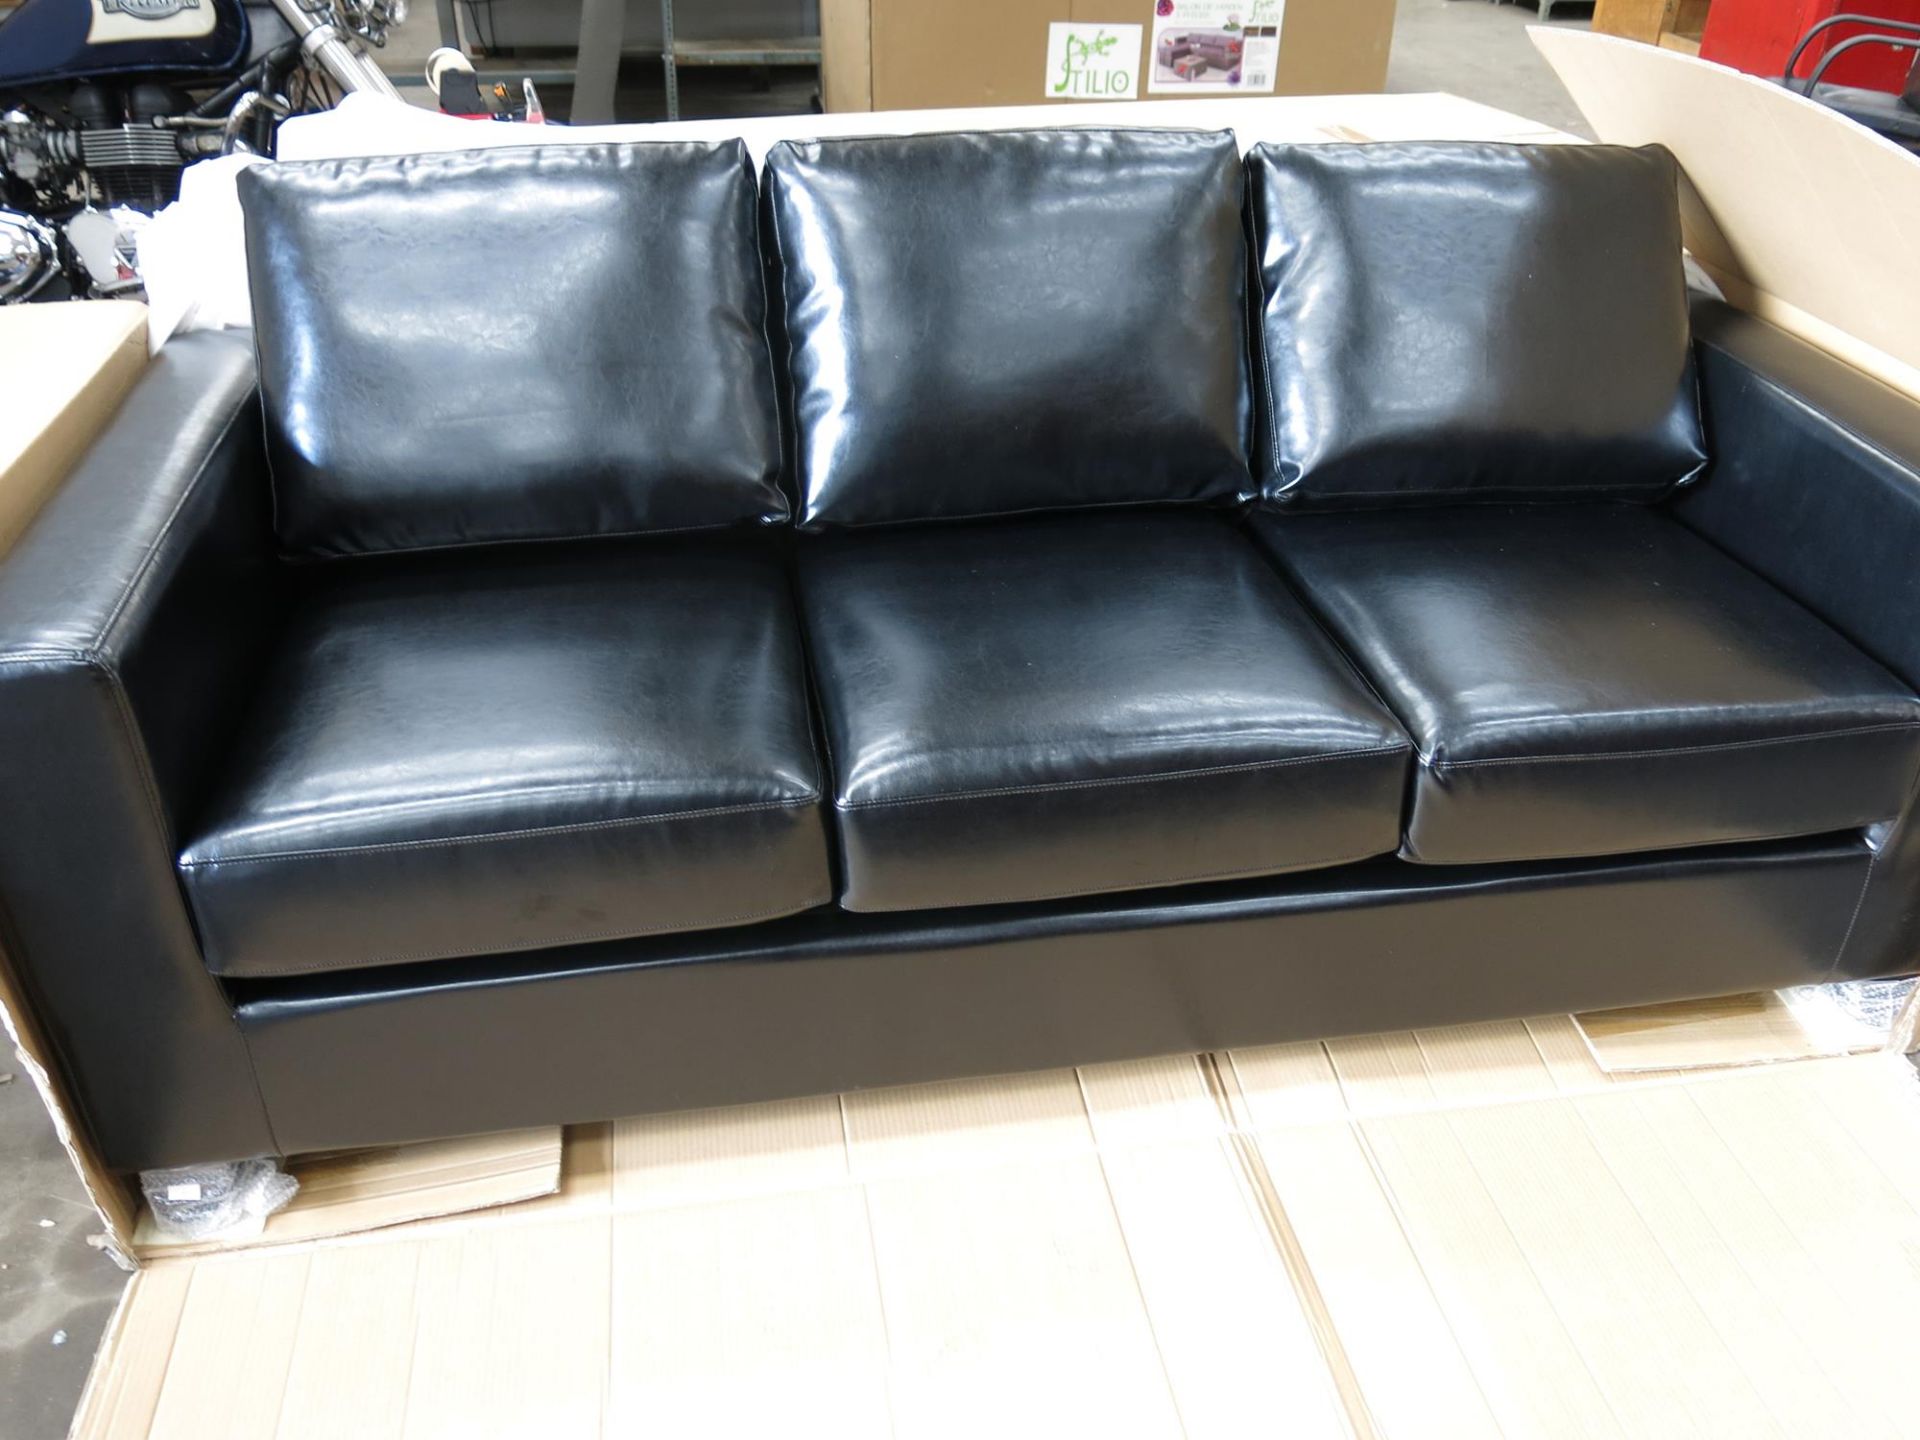 * A new/boxed three seater Aintree Sofa with dark wenge legs. The faux PU leather upholstery is